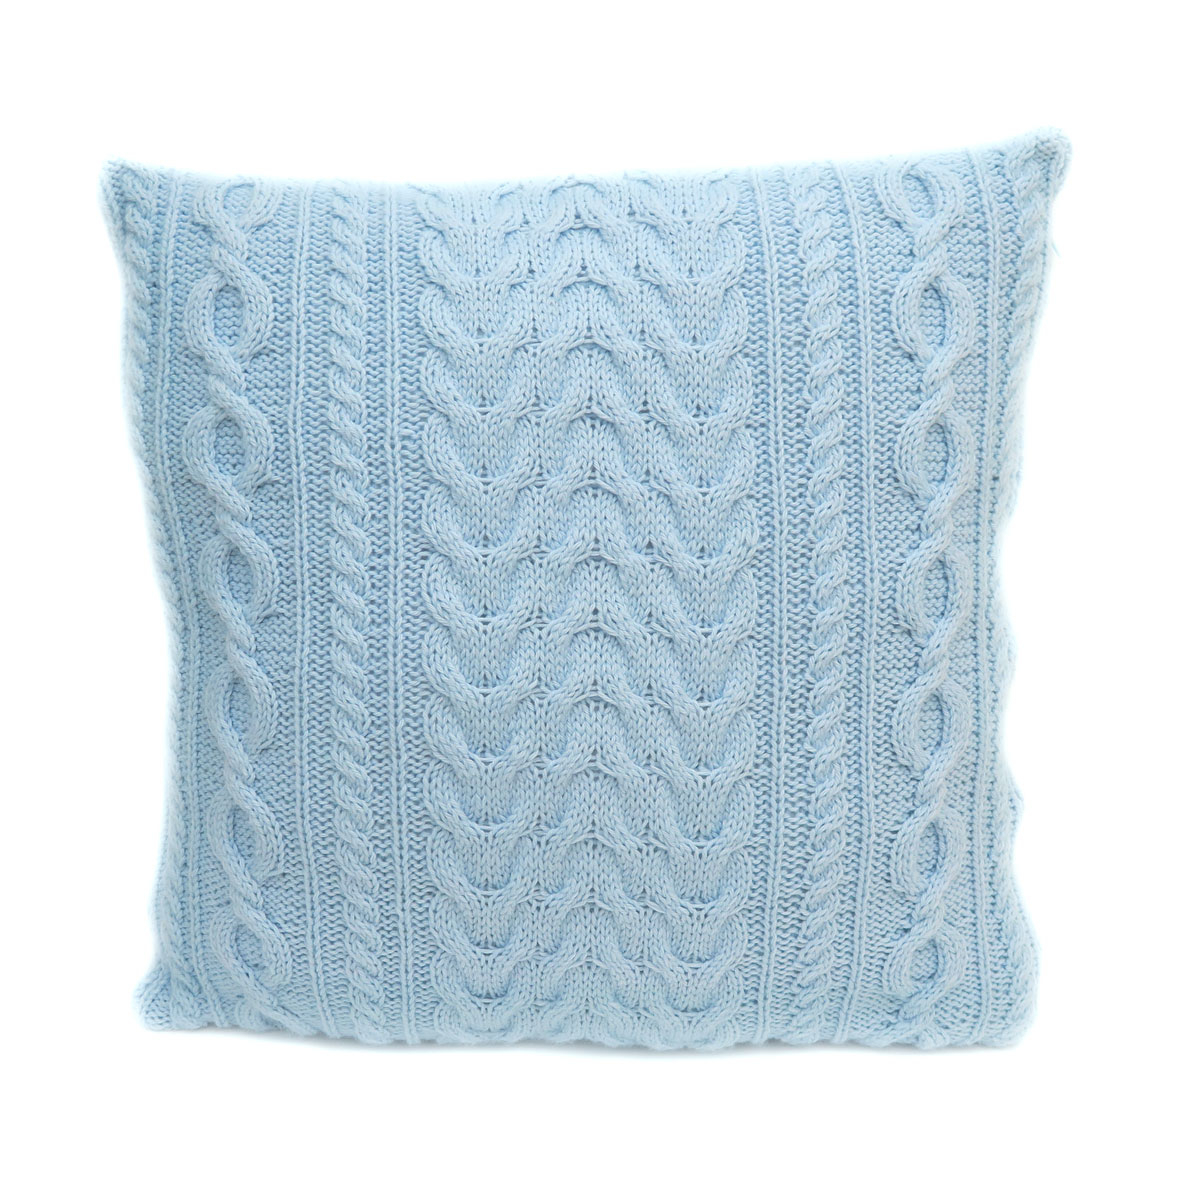 Free Cushion Cover Knitting Pattern Cozy Cable Cushion